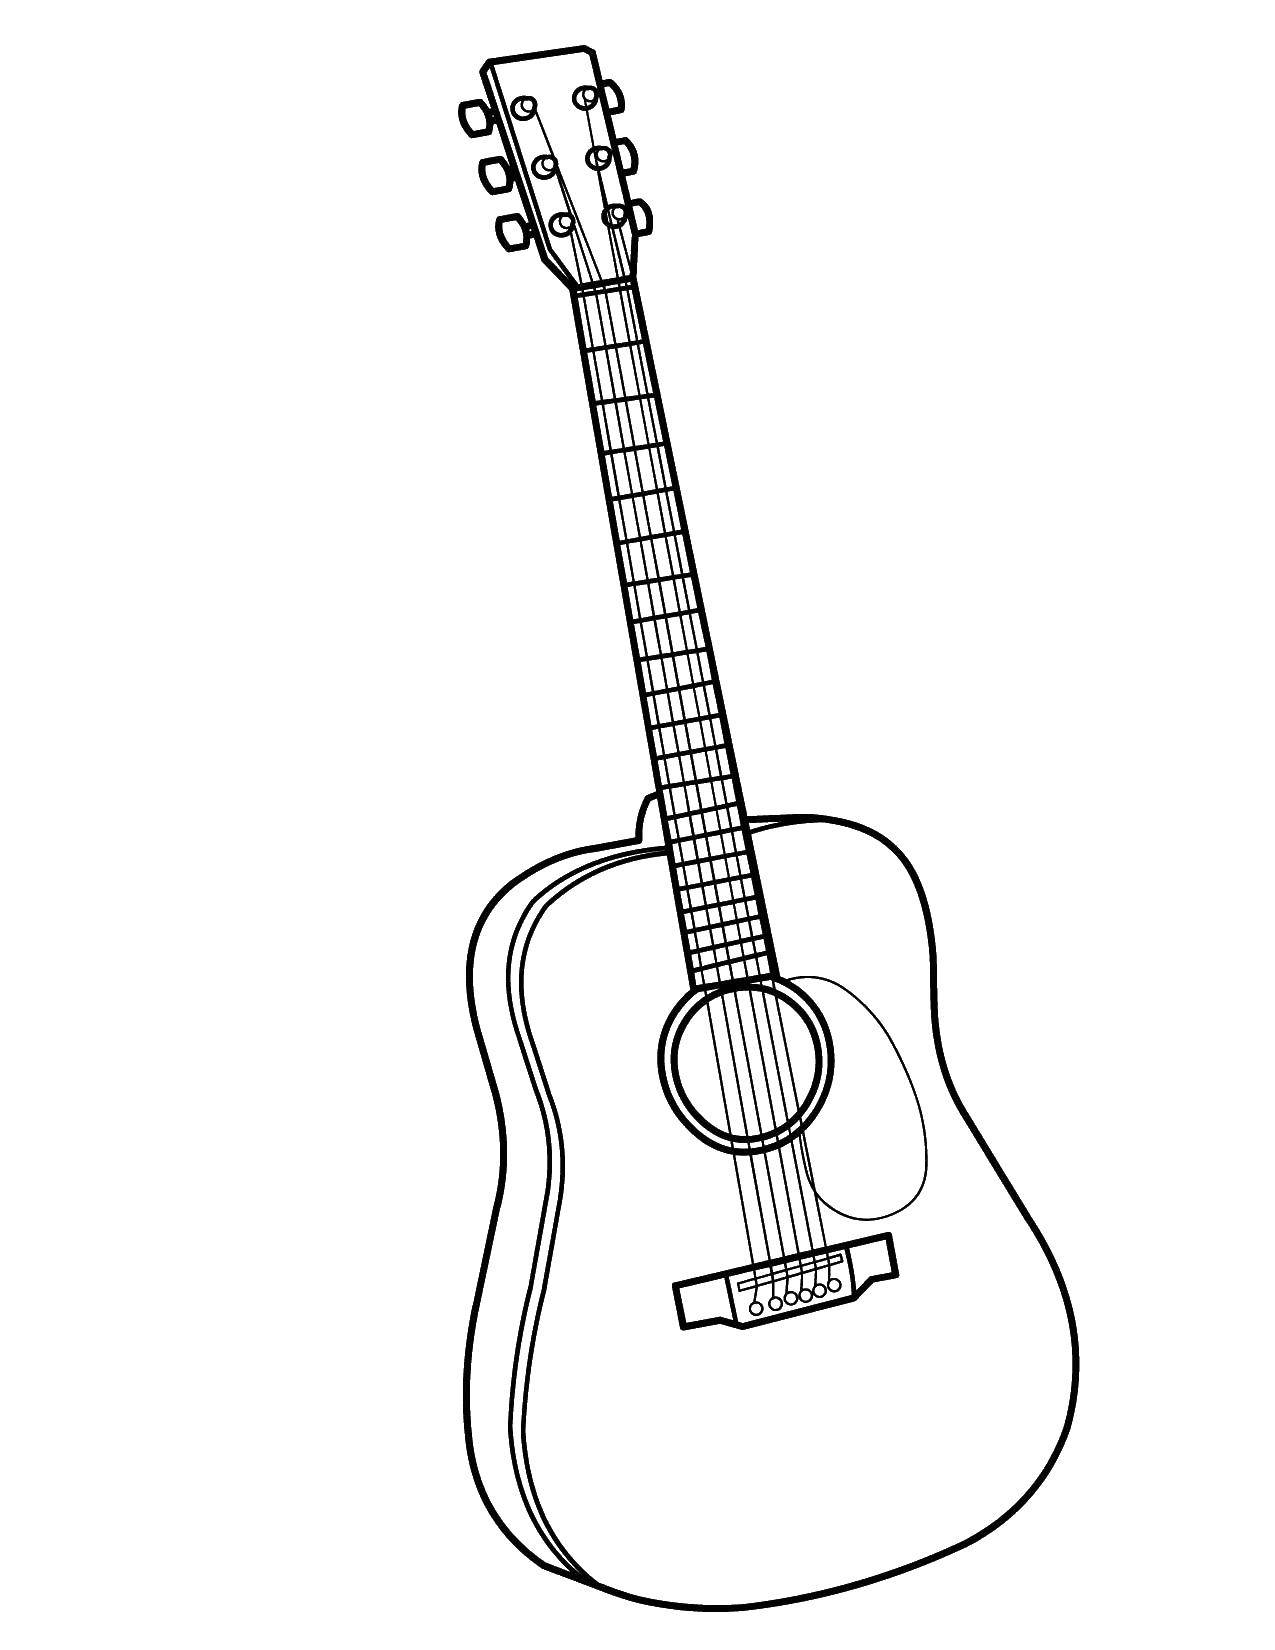 Coloring Guitar. Category Music. Tags:  Music, instrument, musician, note.